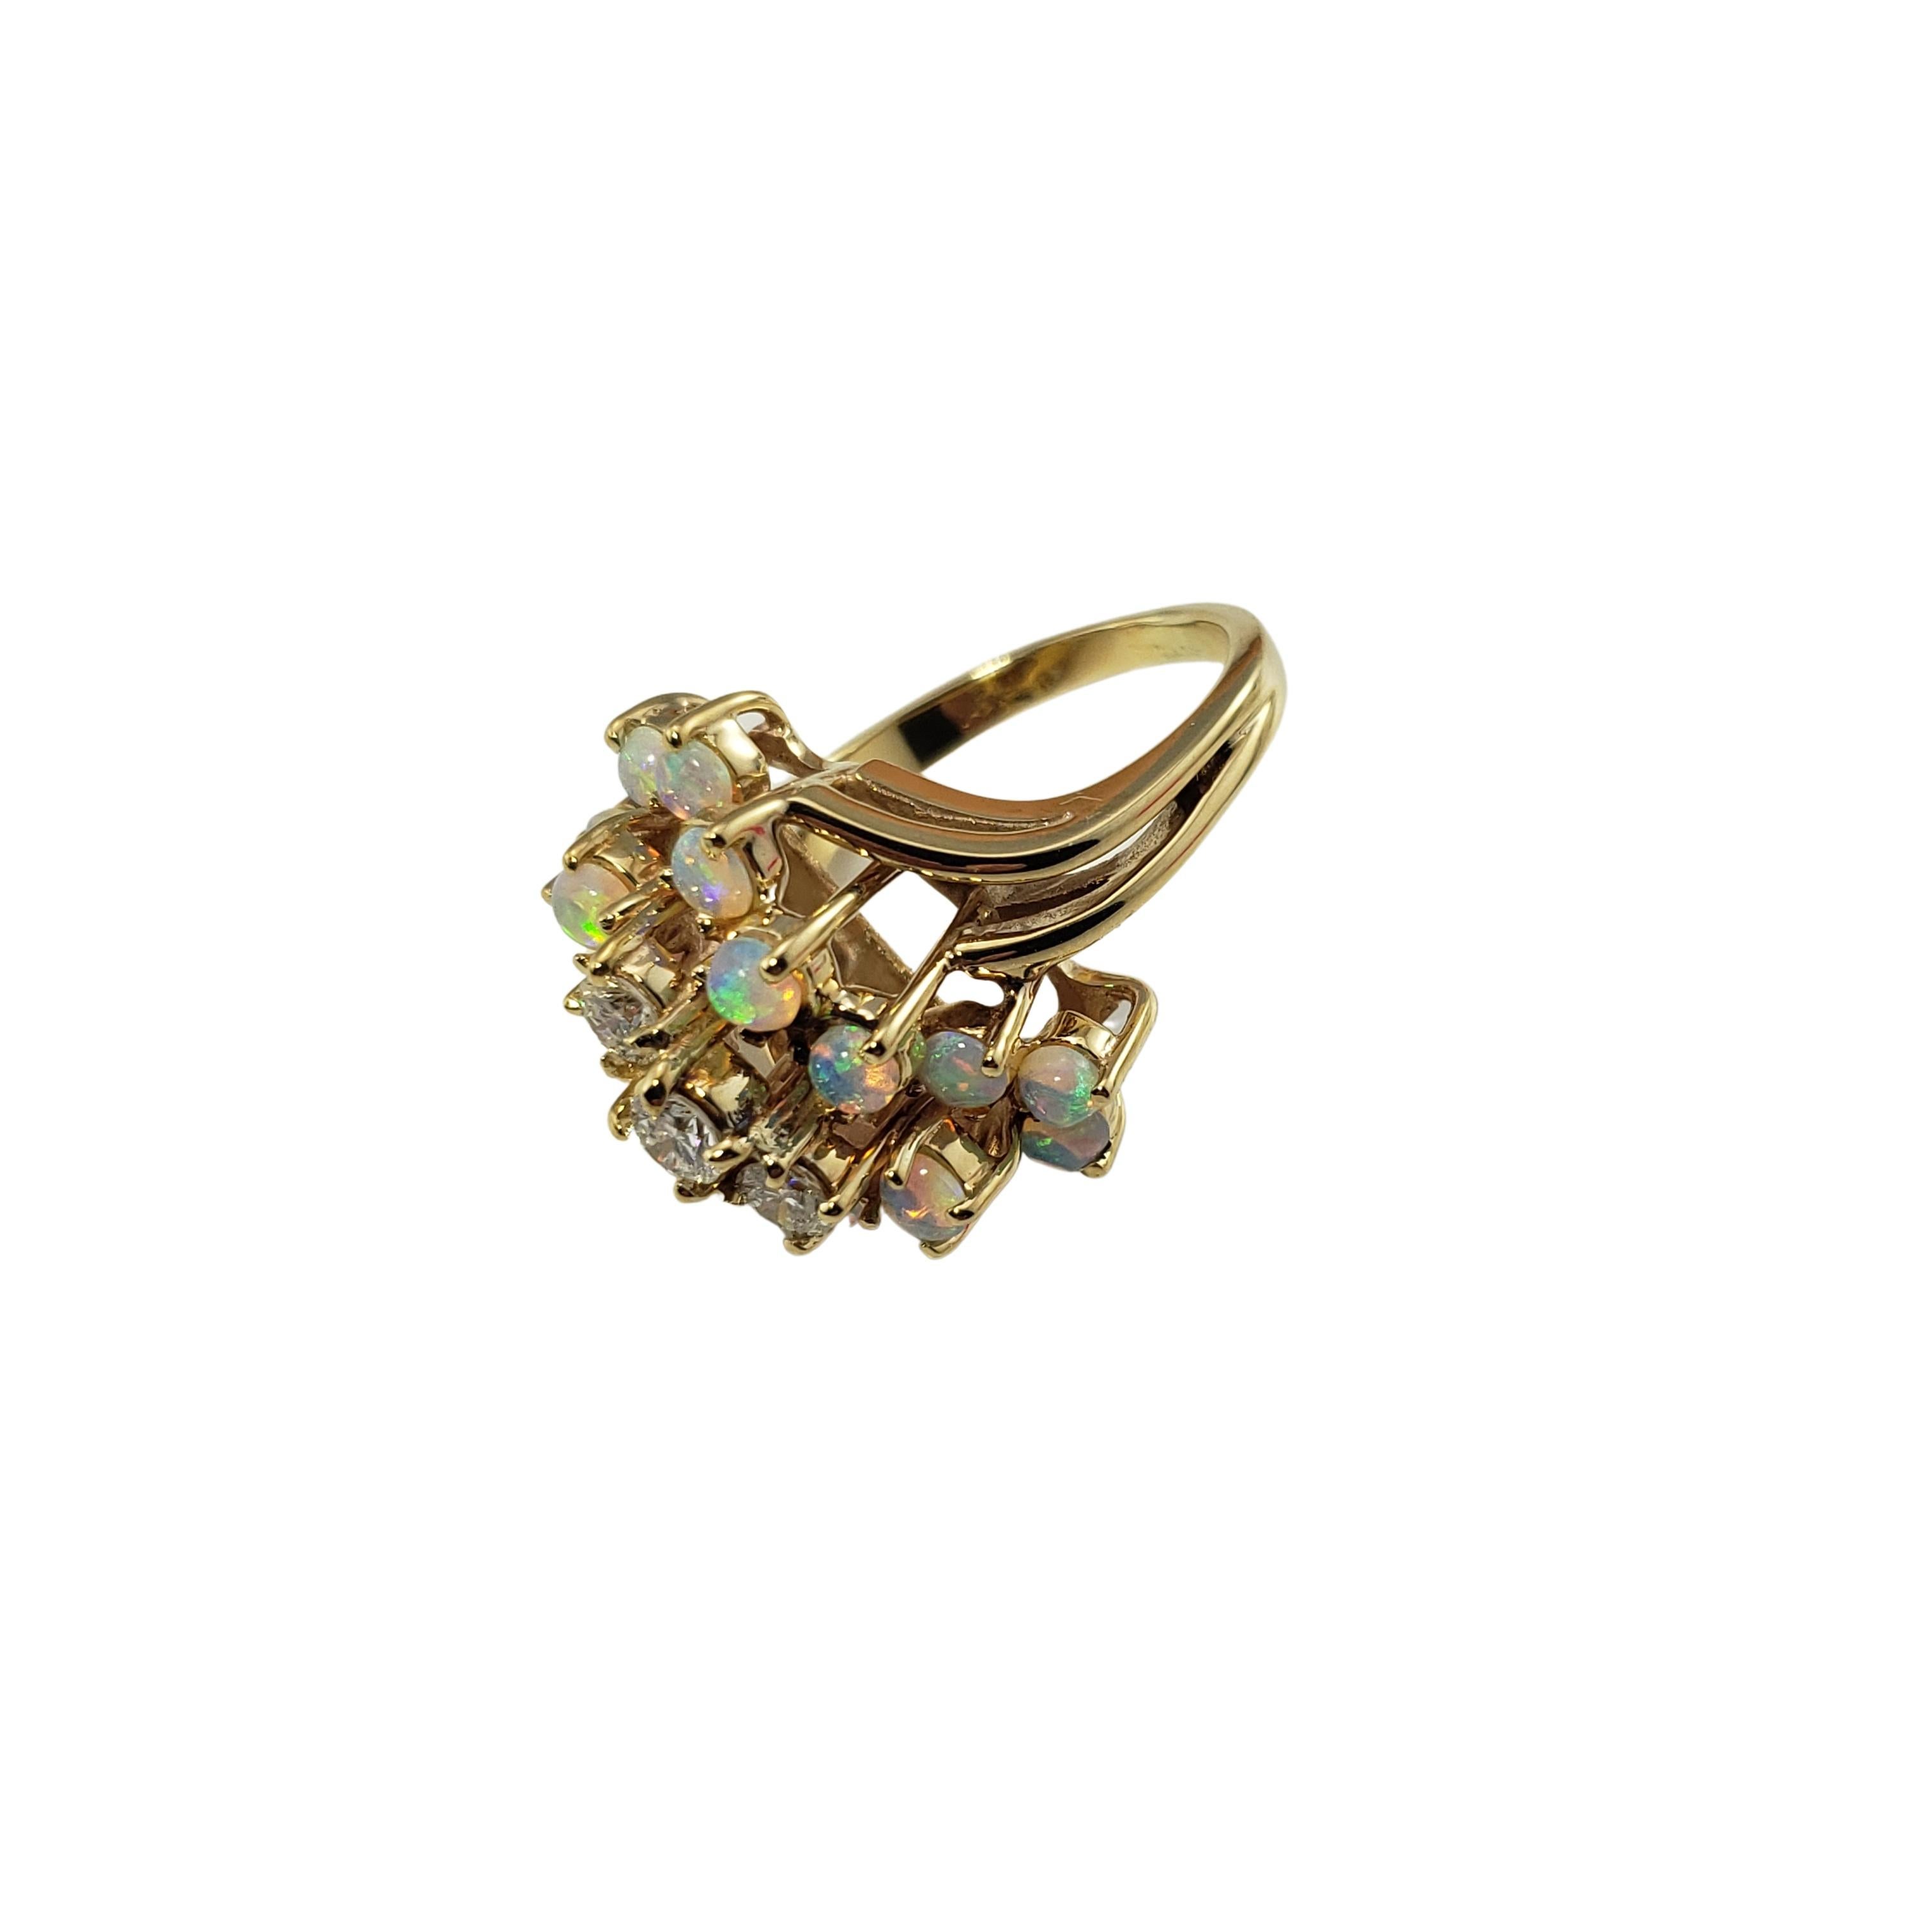 14 Karat Gold Opal and Diamond Ring Size 6.5-

This stunning ring features 16 round opals and three round brilliant cut diamonds set in classic 14K yellow gold.  Width:  19 mm.
Shank:  2 mm.  Height:  14 mm.

Approximate total diamond weight:  .35